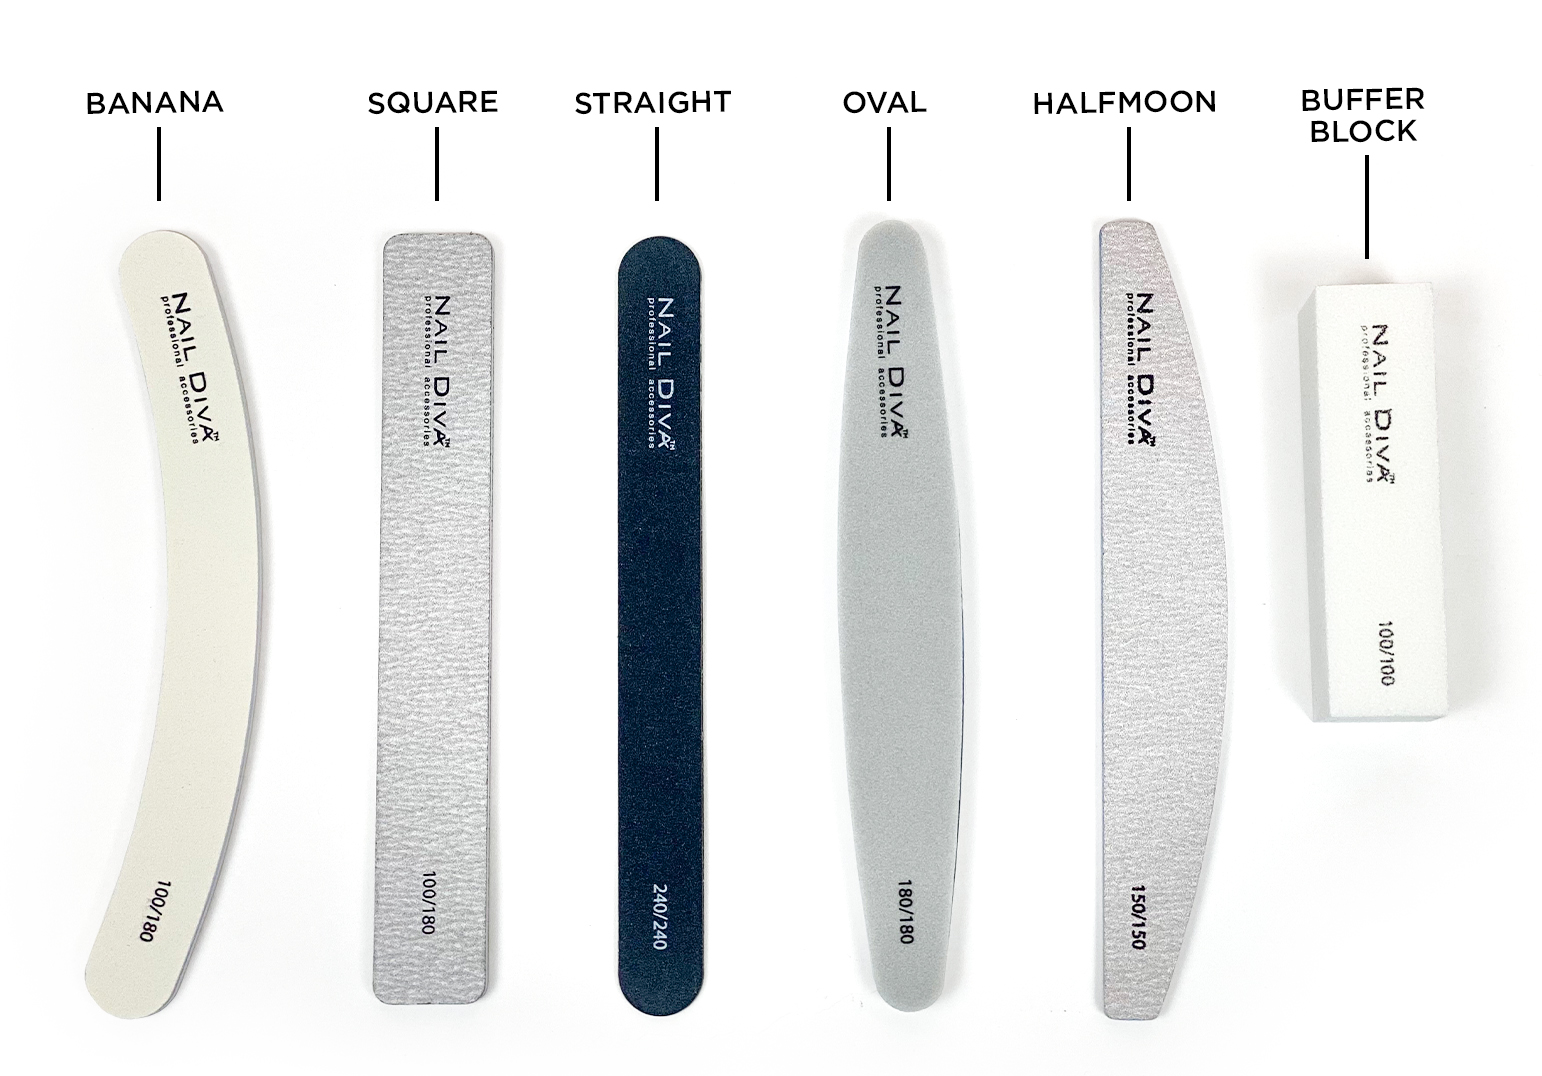 Discover 76+ branded nail files